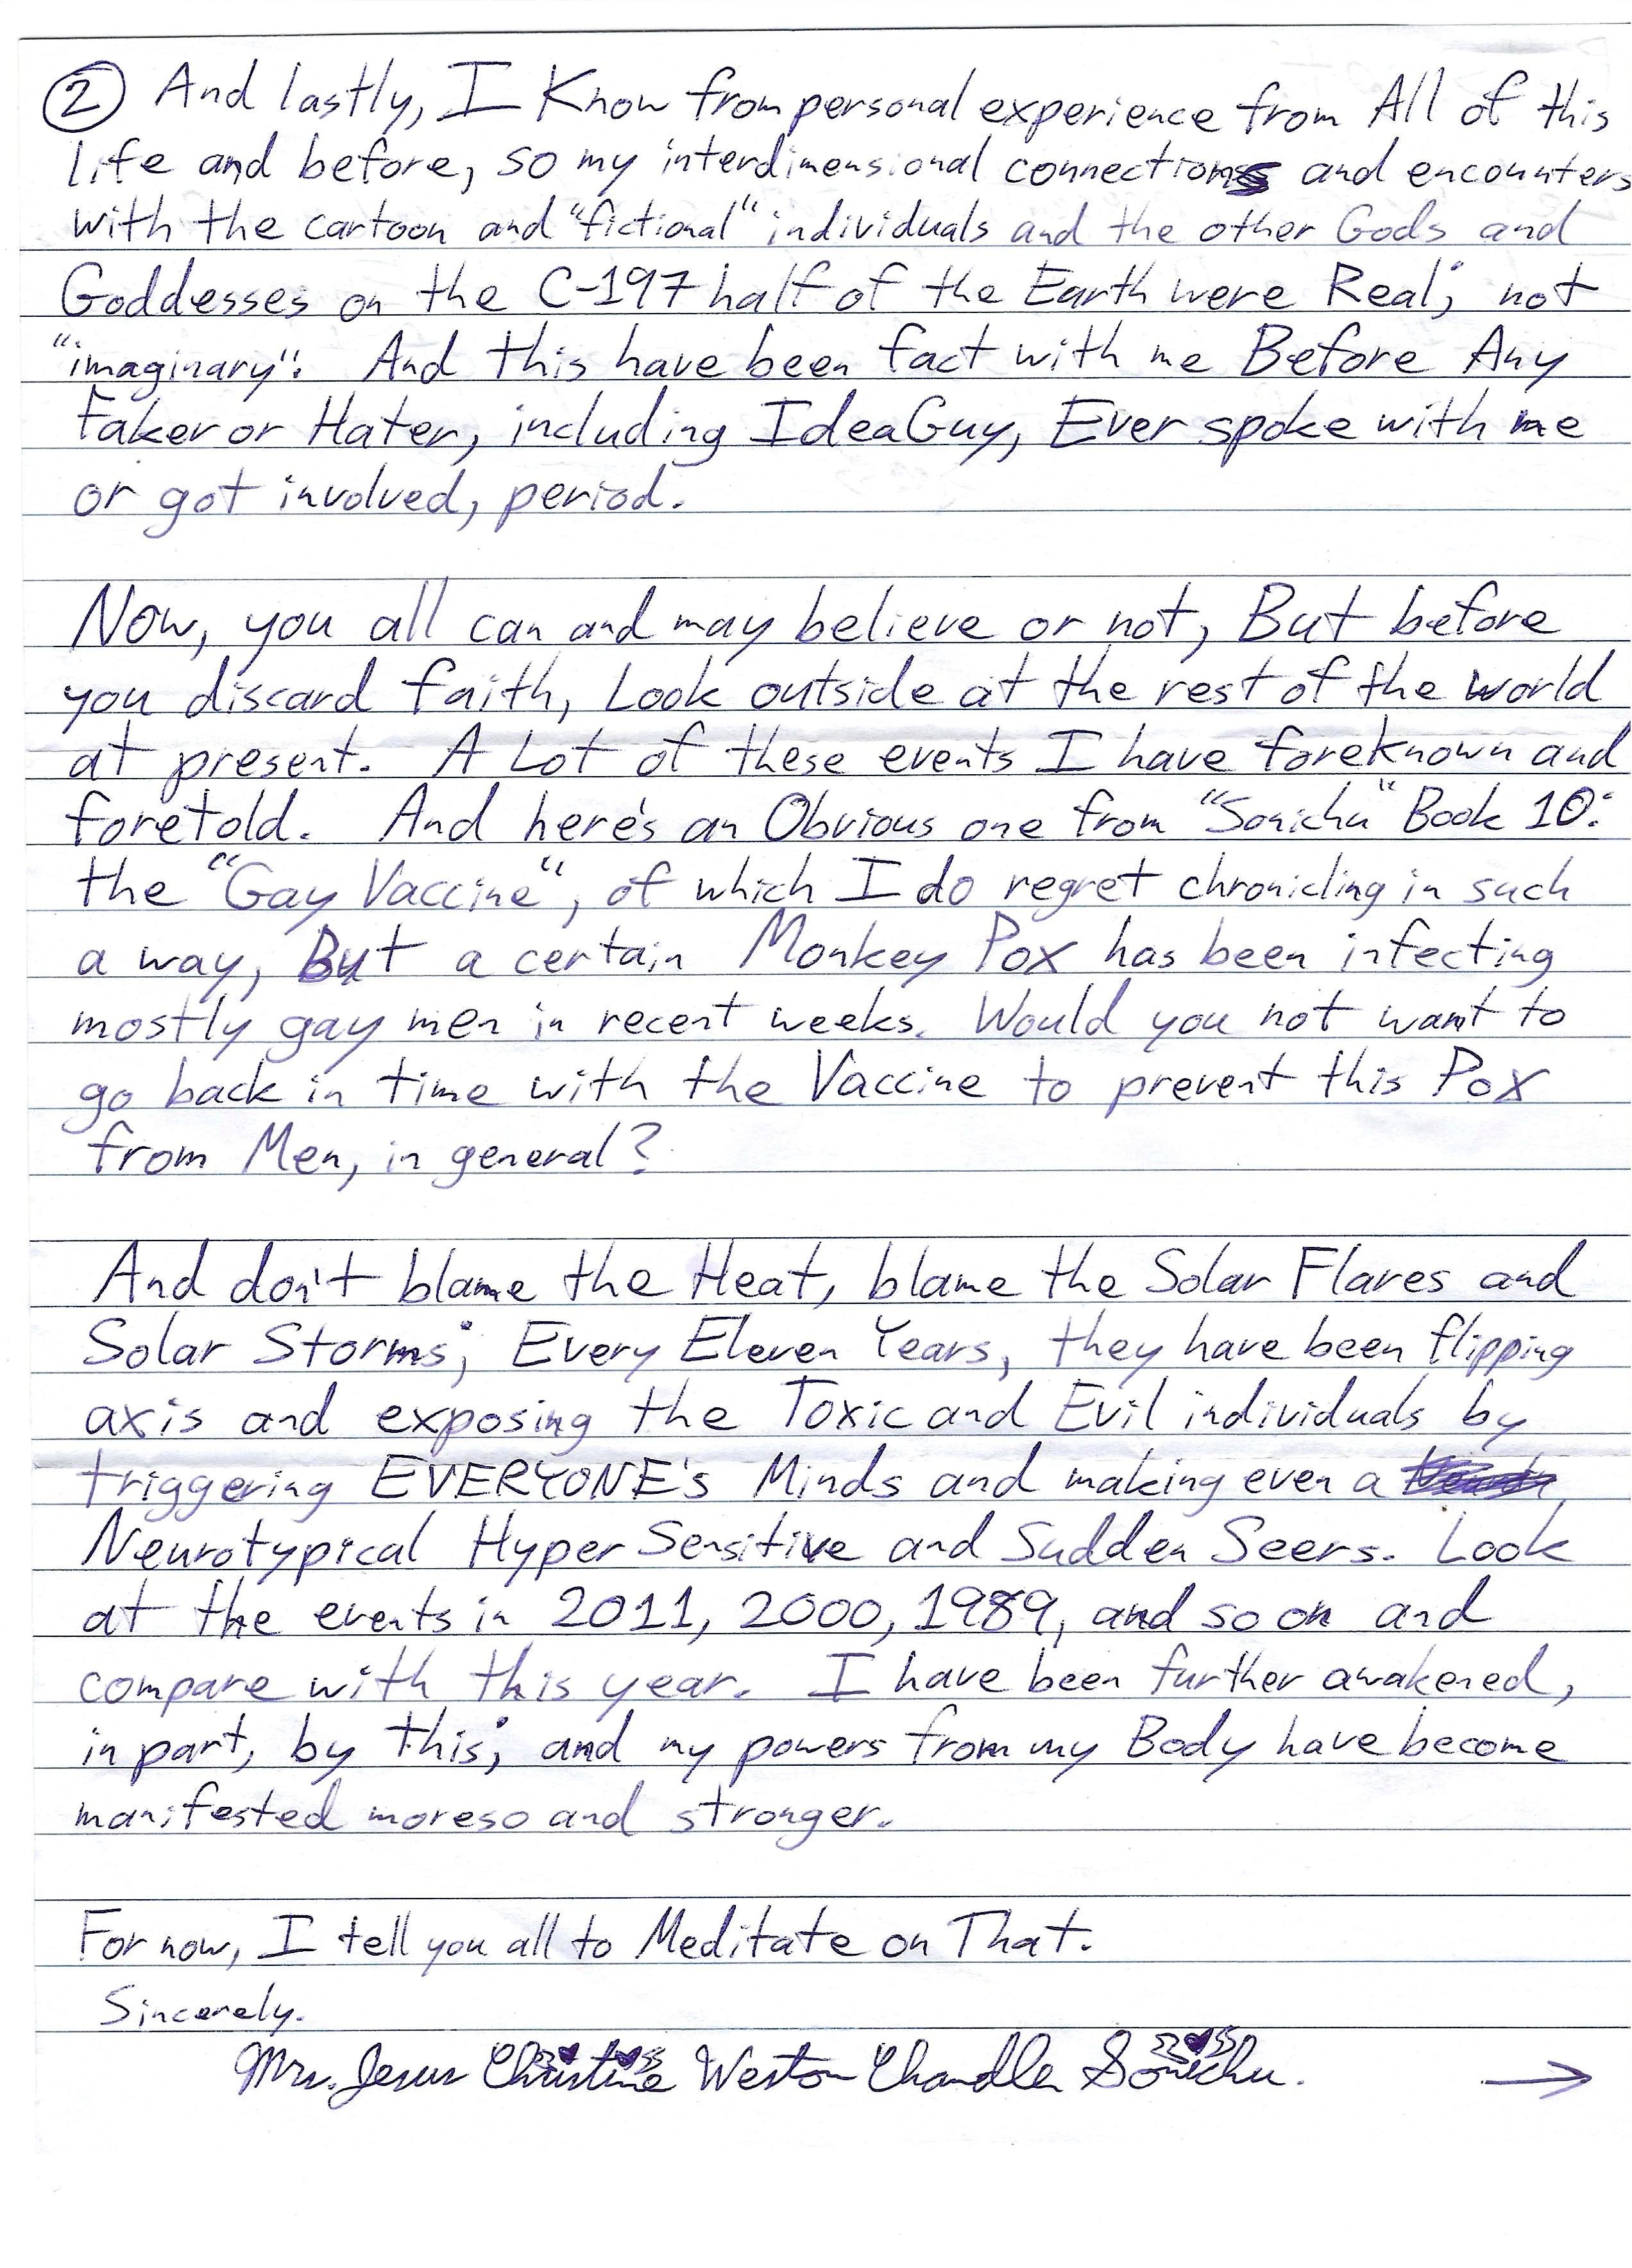 August 12 Letter Page 3.jpg